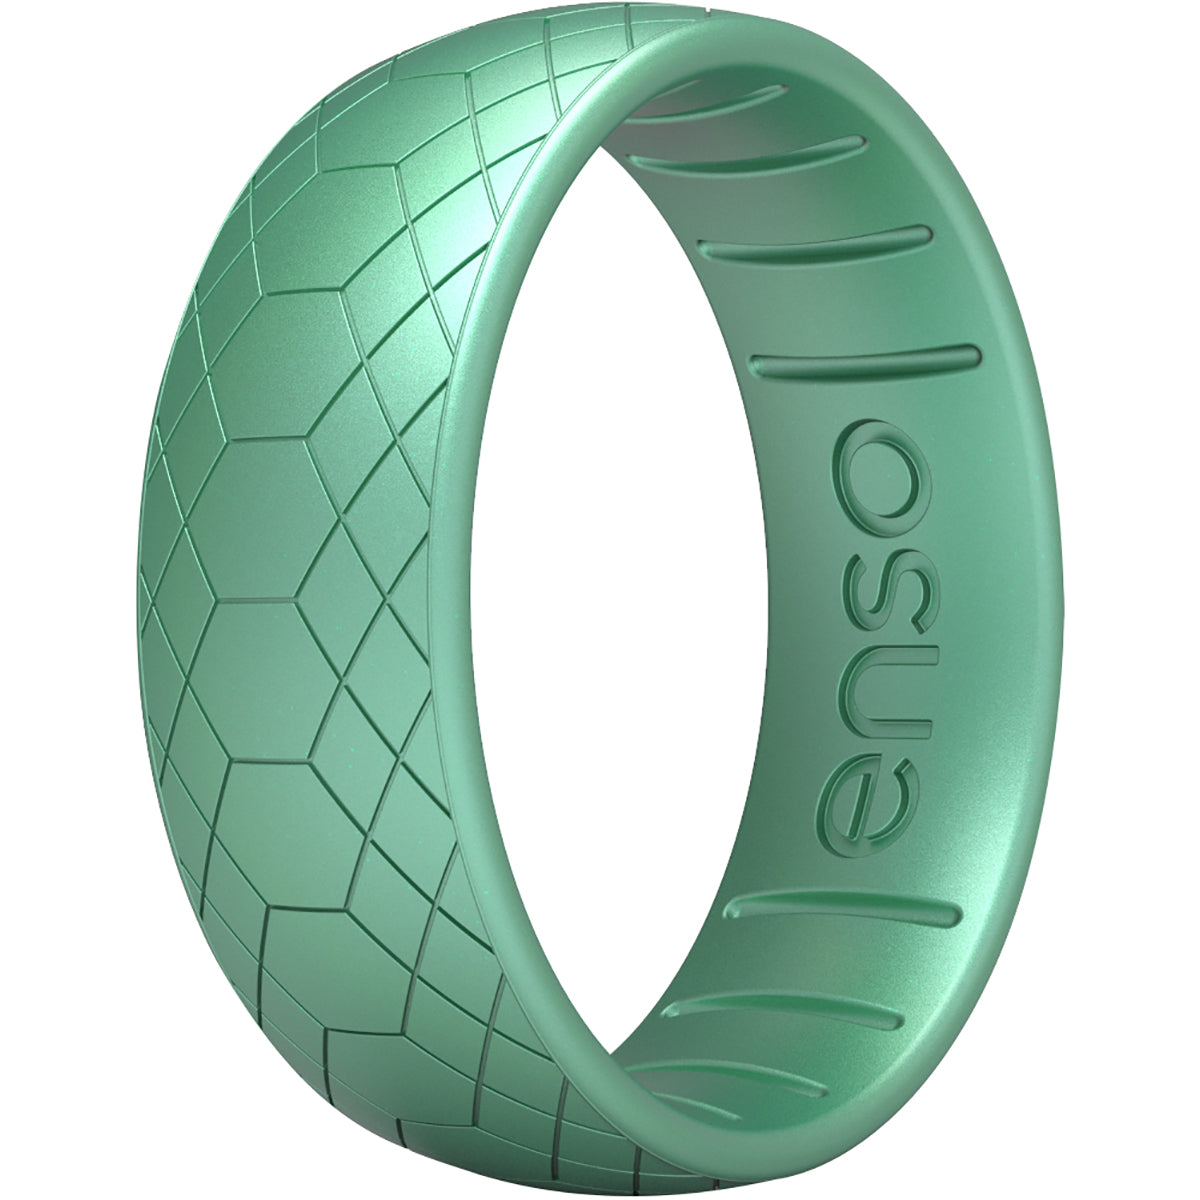 Enso Rings Classic Etched Legends Series Silicone Ring - 12 - Medusa Snake Enso Rings